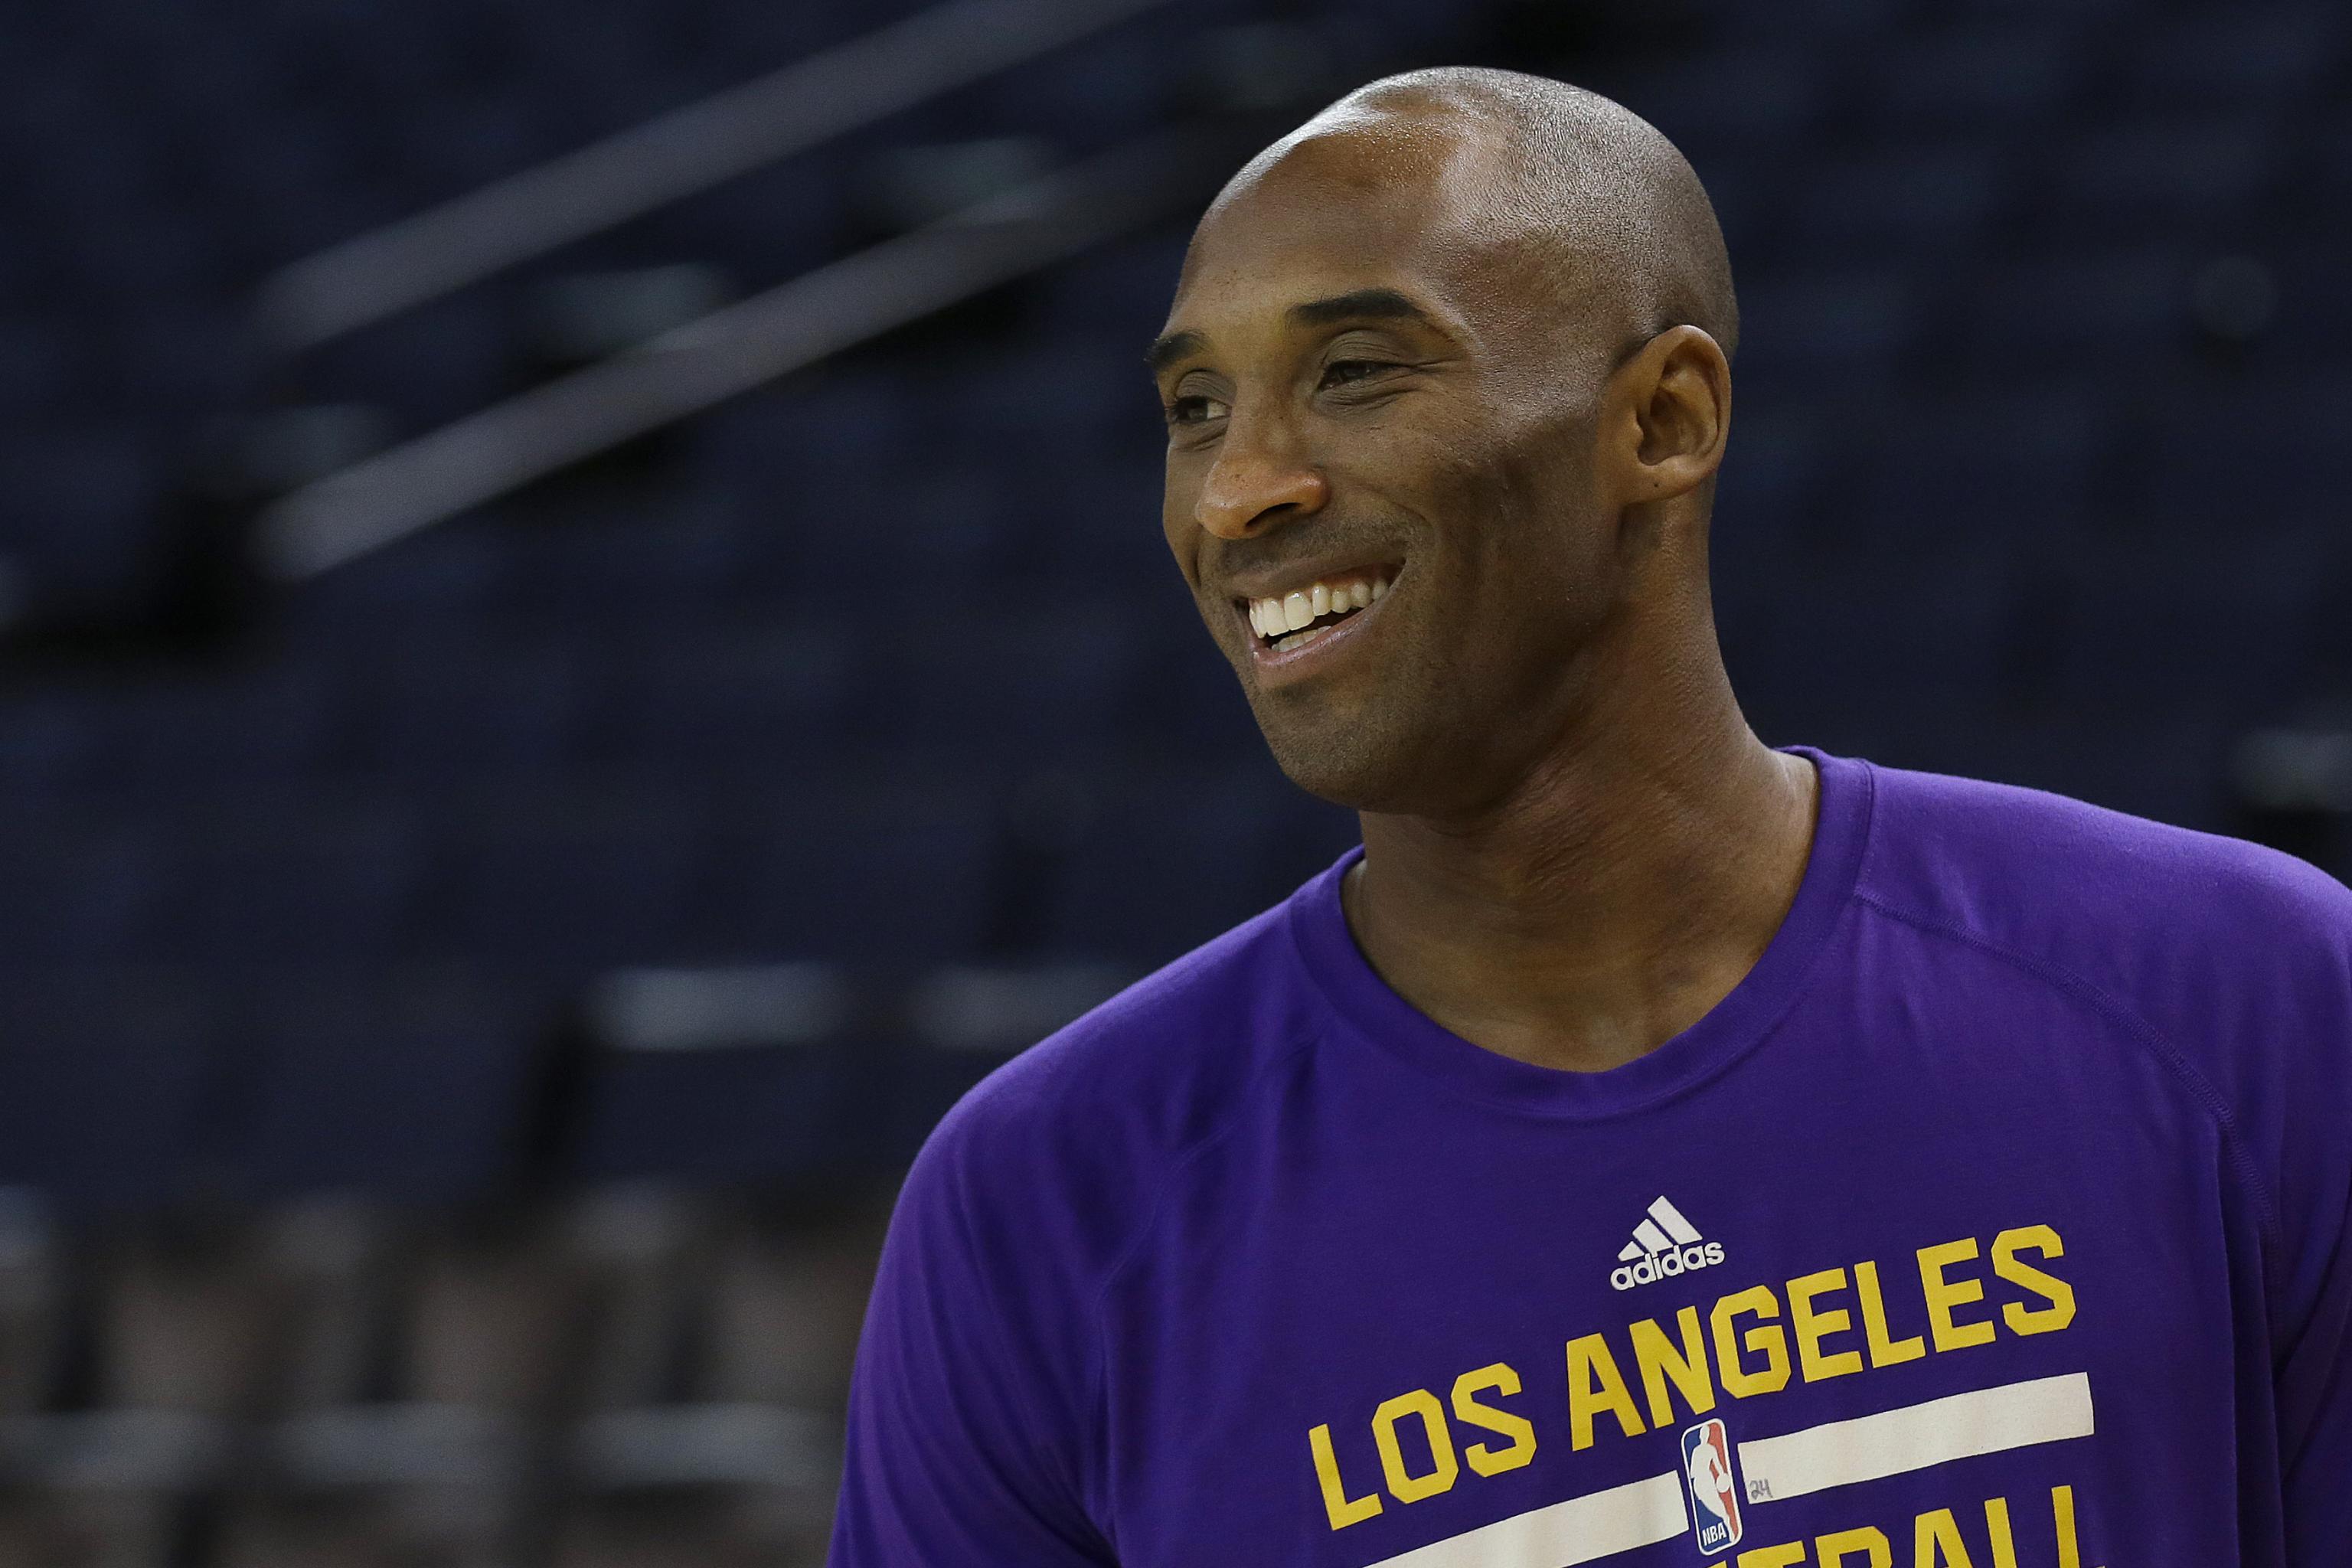 Kobe Bryant to retire at end of 2015-16 season - Duluth News